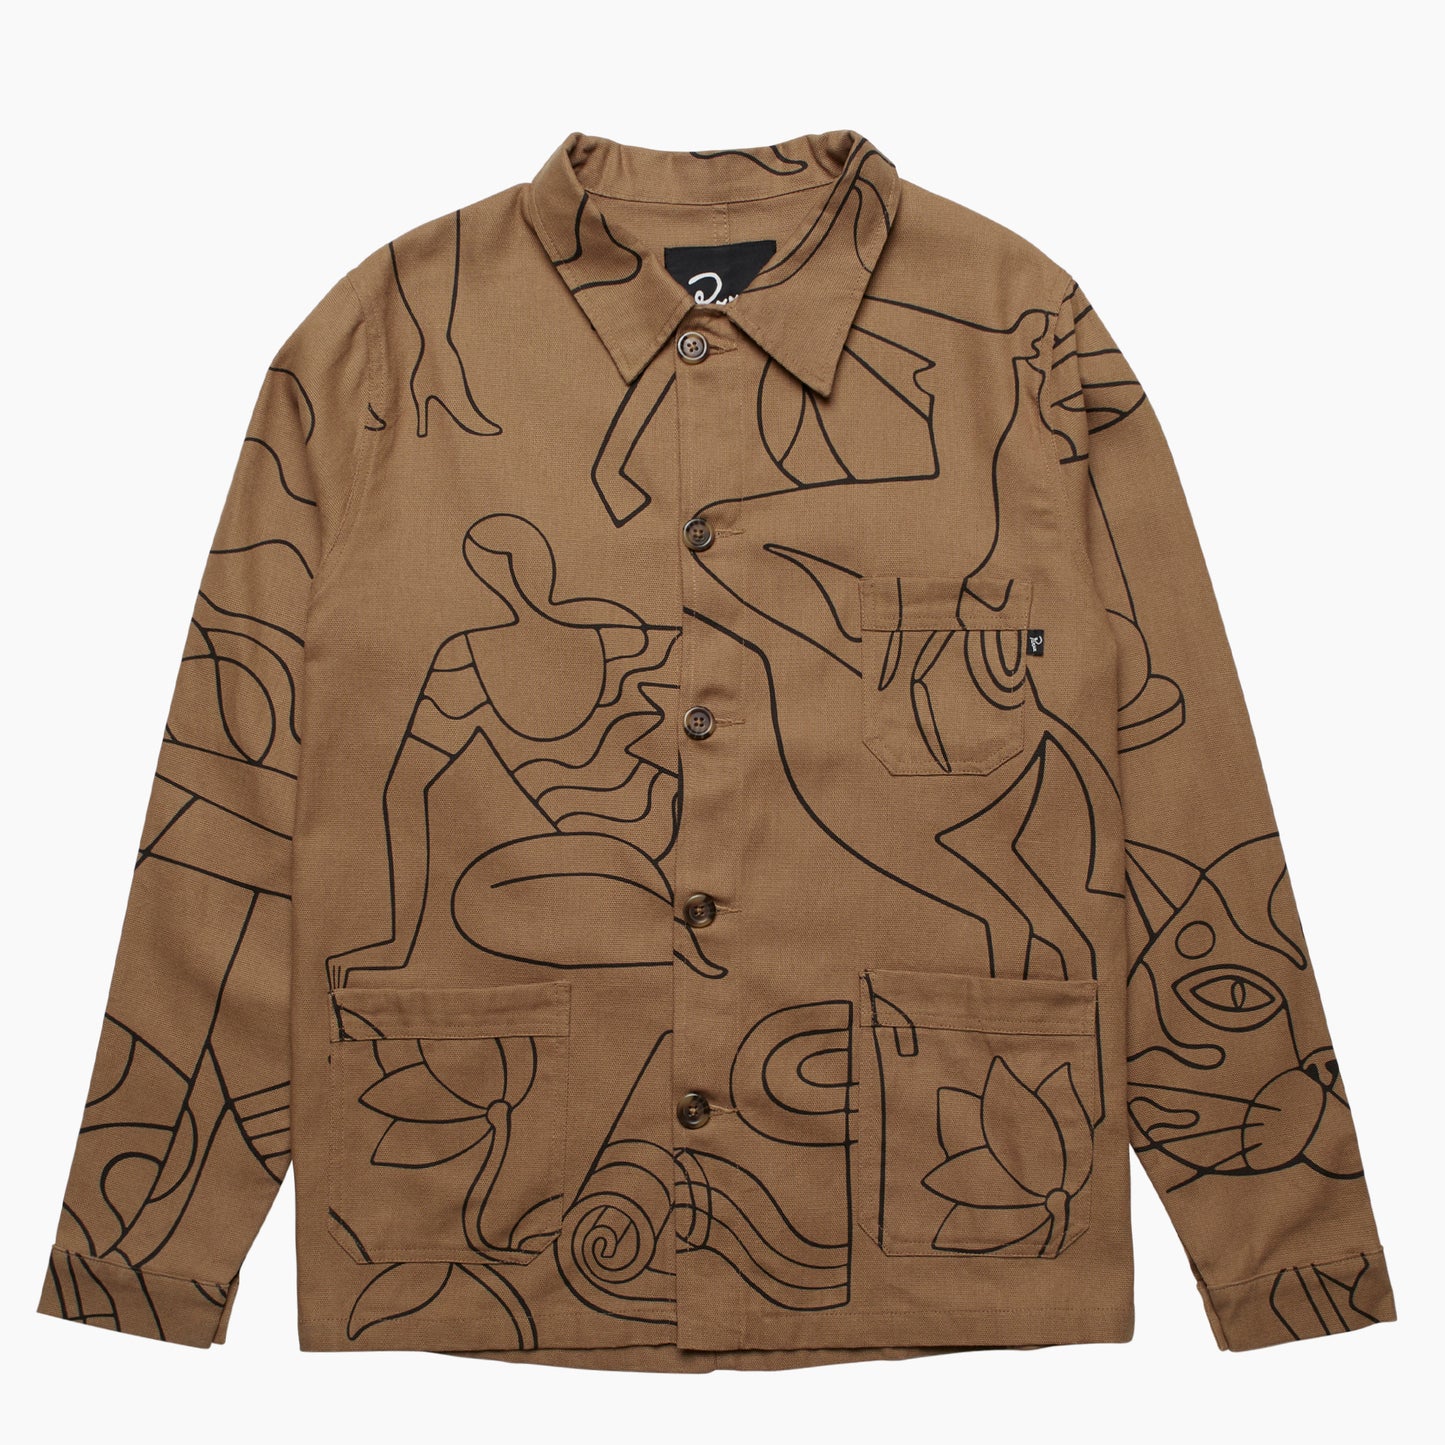 By Parra Experiece Life Worker Jacket